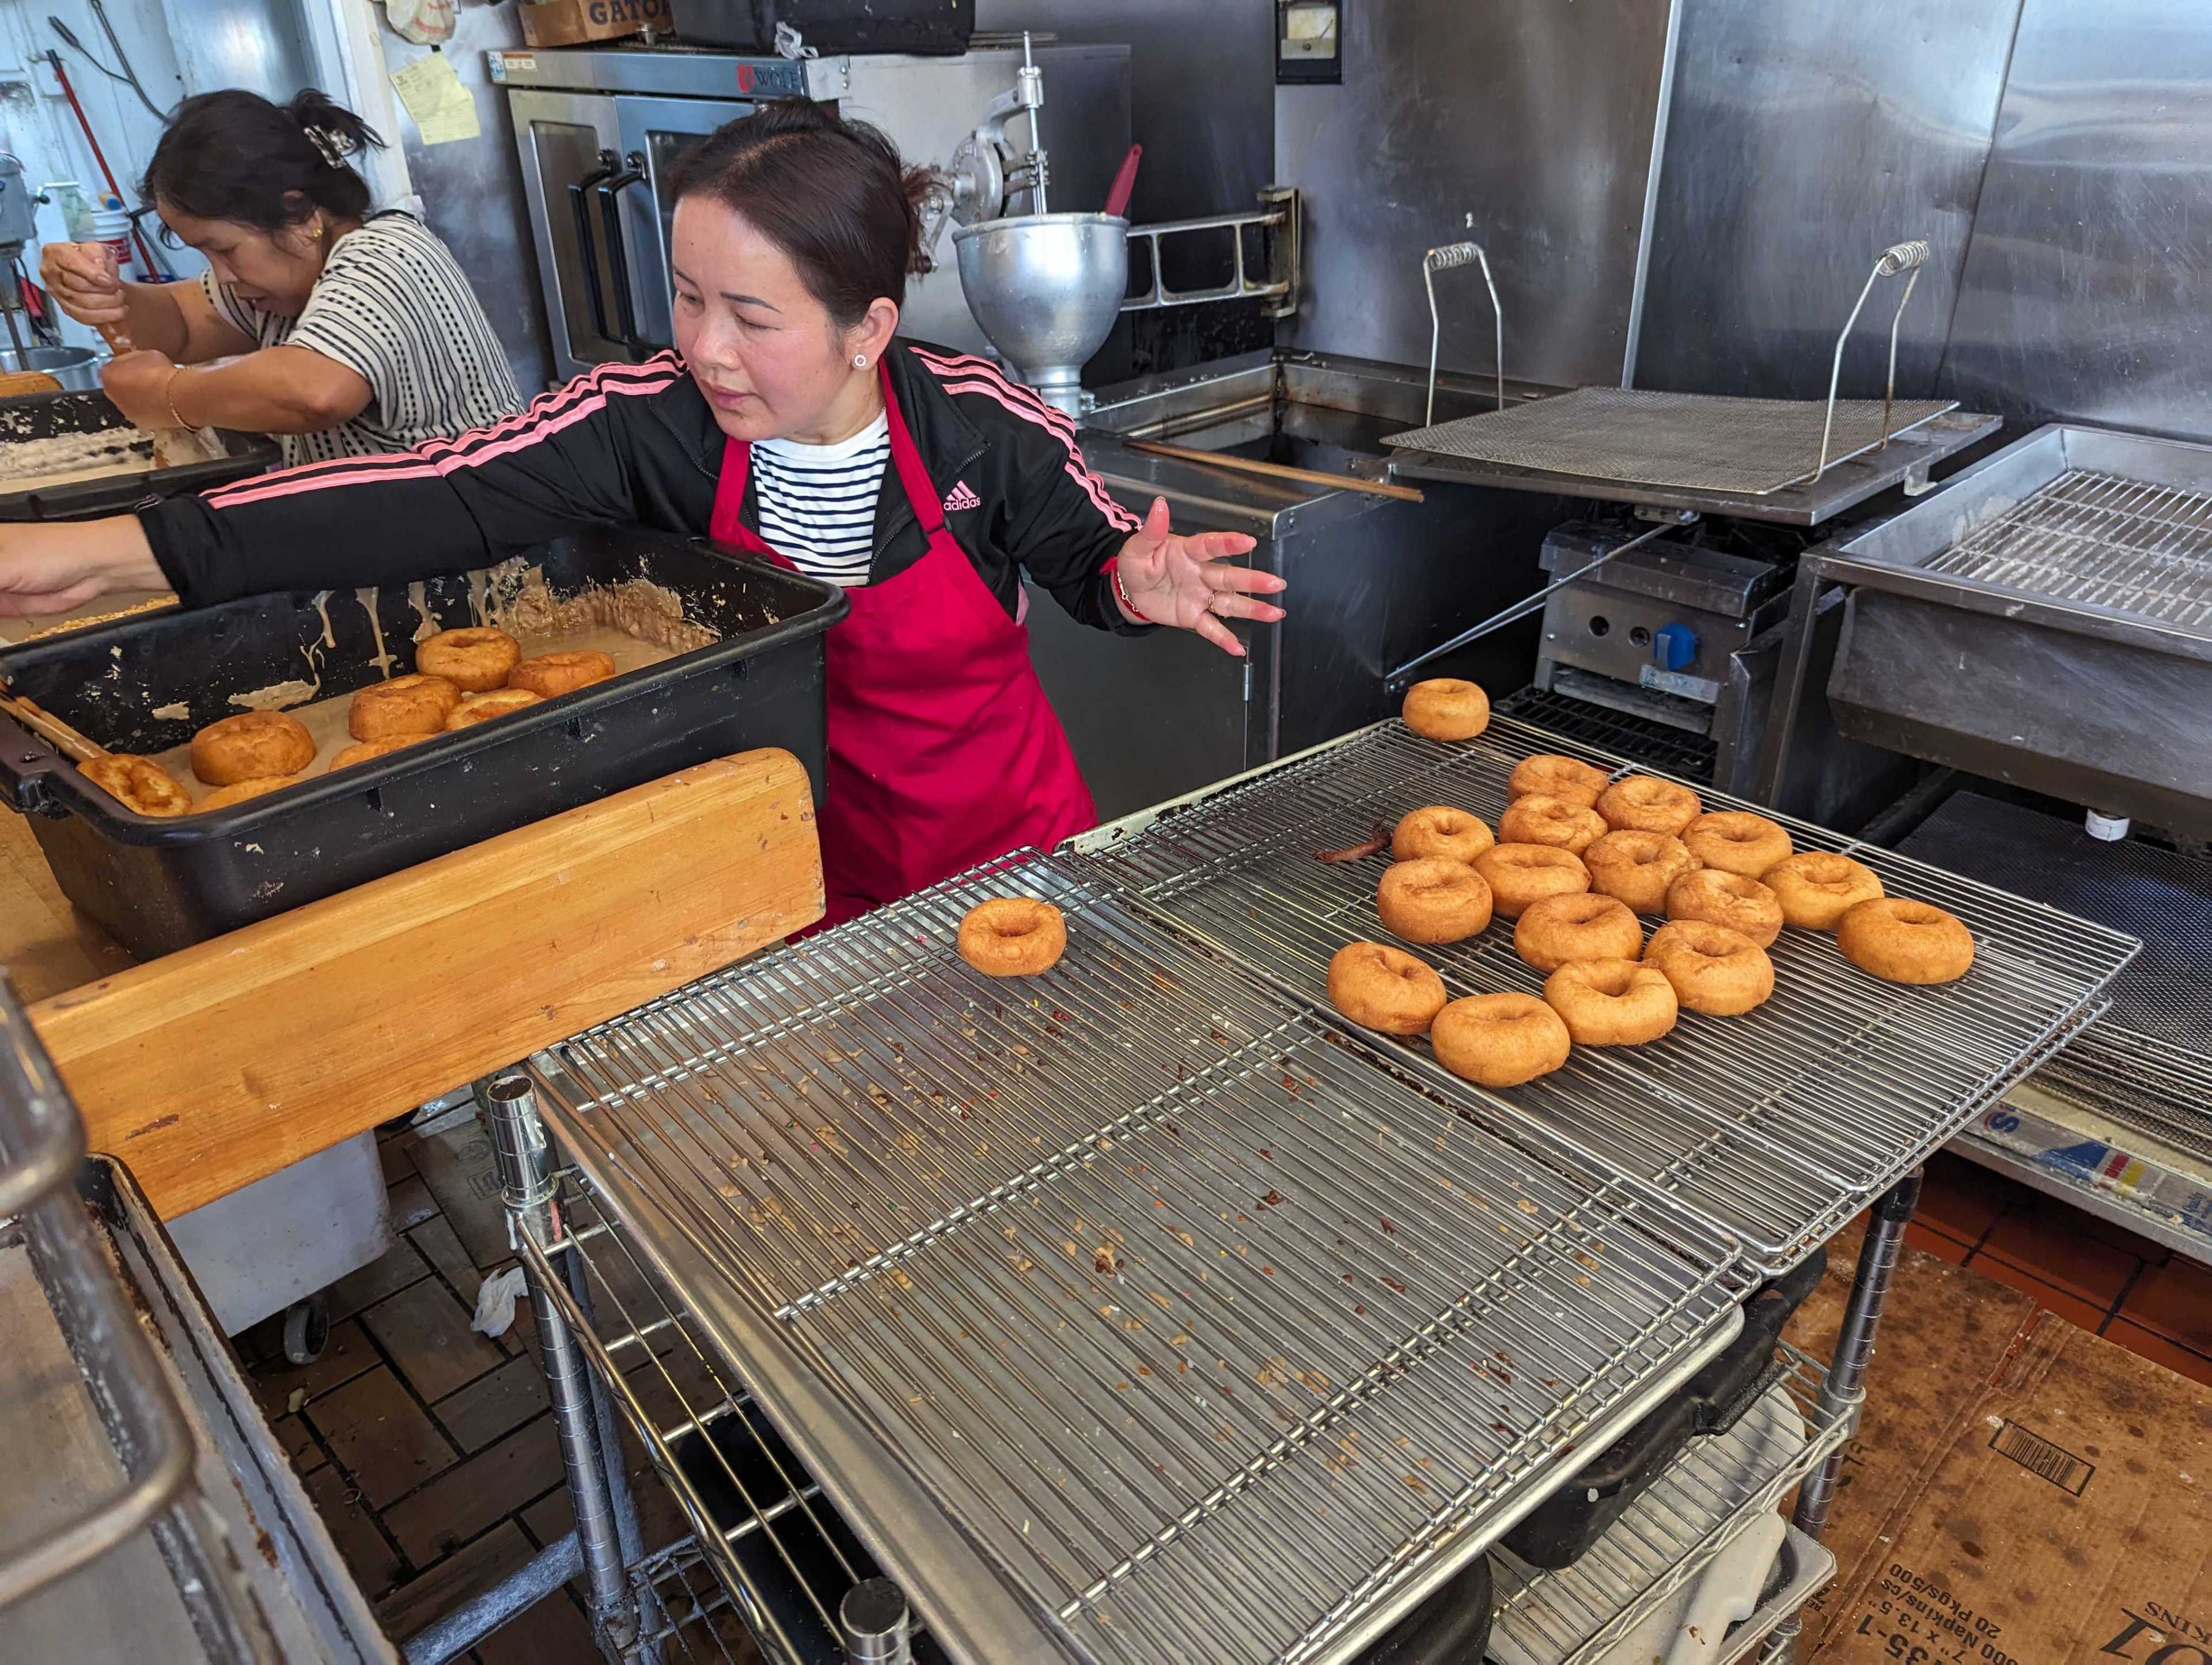 Happy Donuts owner Ratha Vann prepares fresh doughnuts for glazing in her kitchen as a worker readies a batch of batter for cooking.